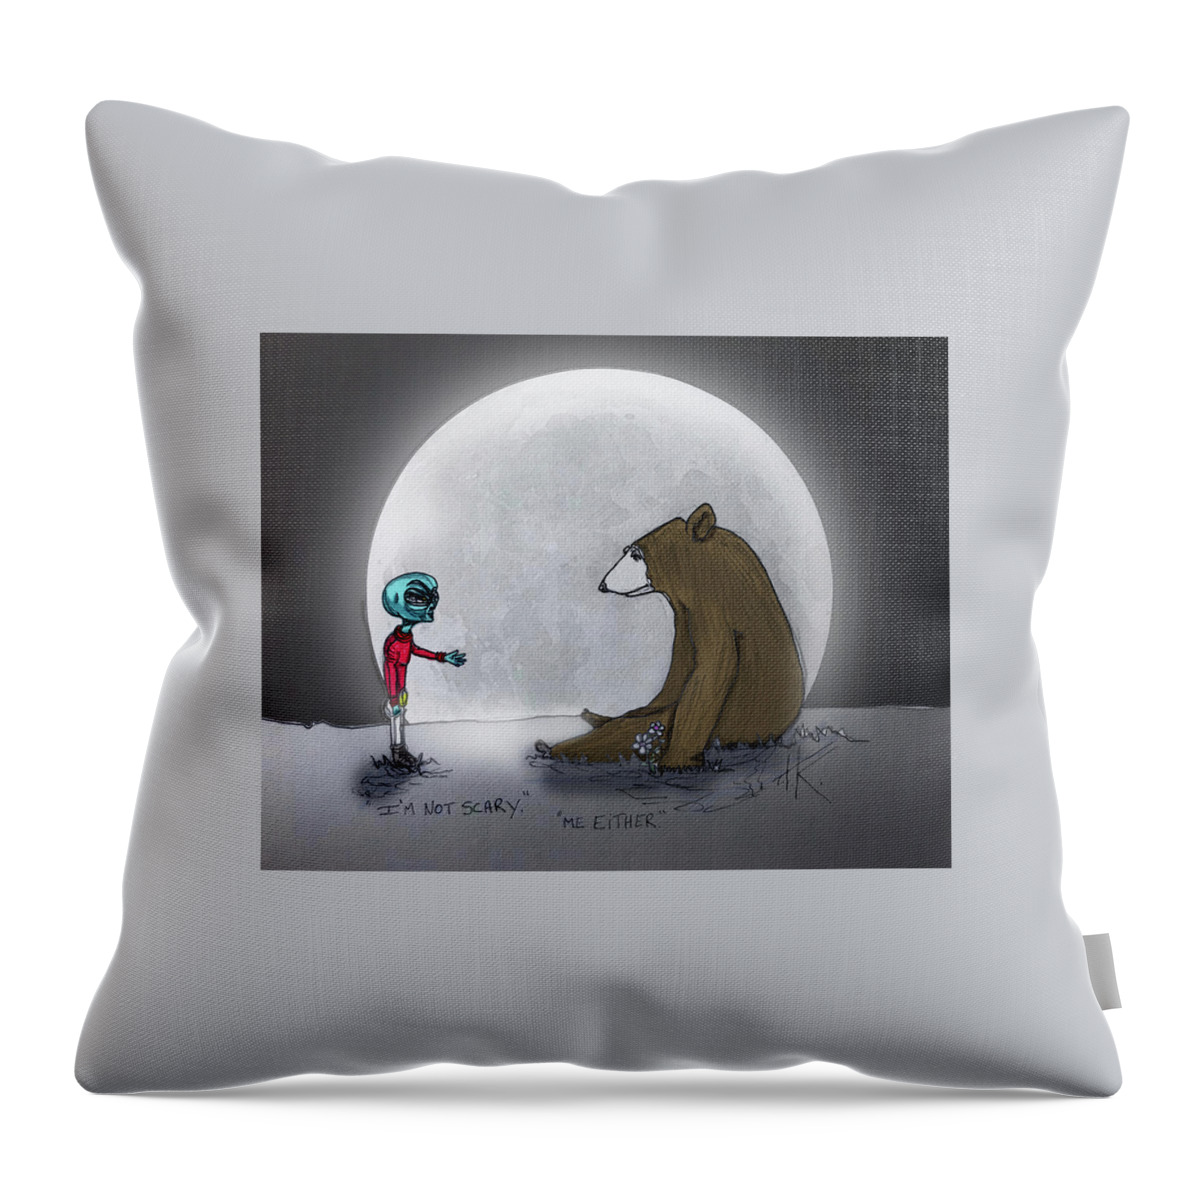 Bear Throw Pillow featuring the drawing Not Scary by Similar Alien